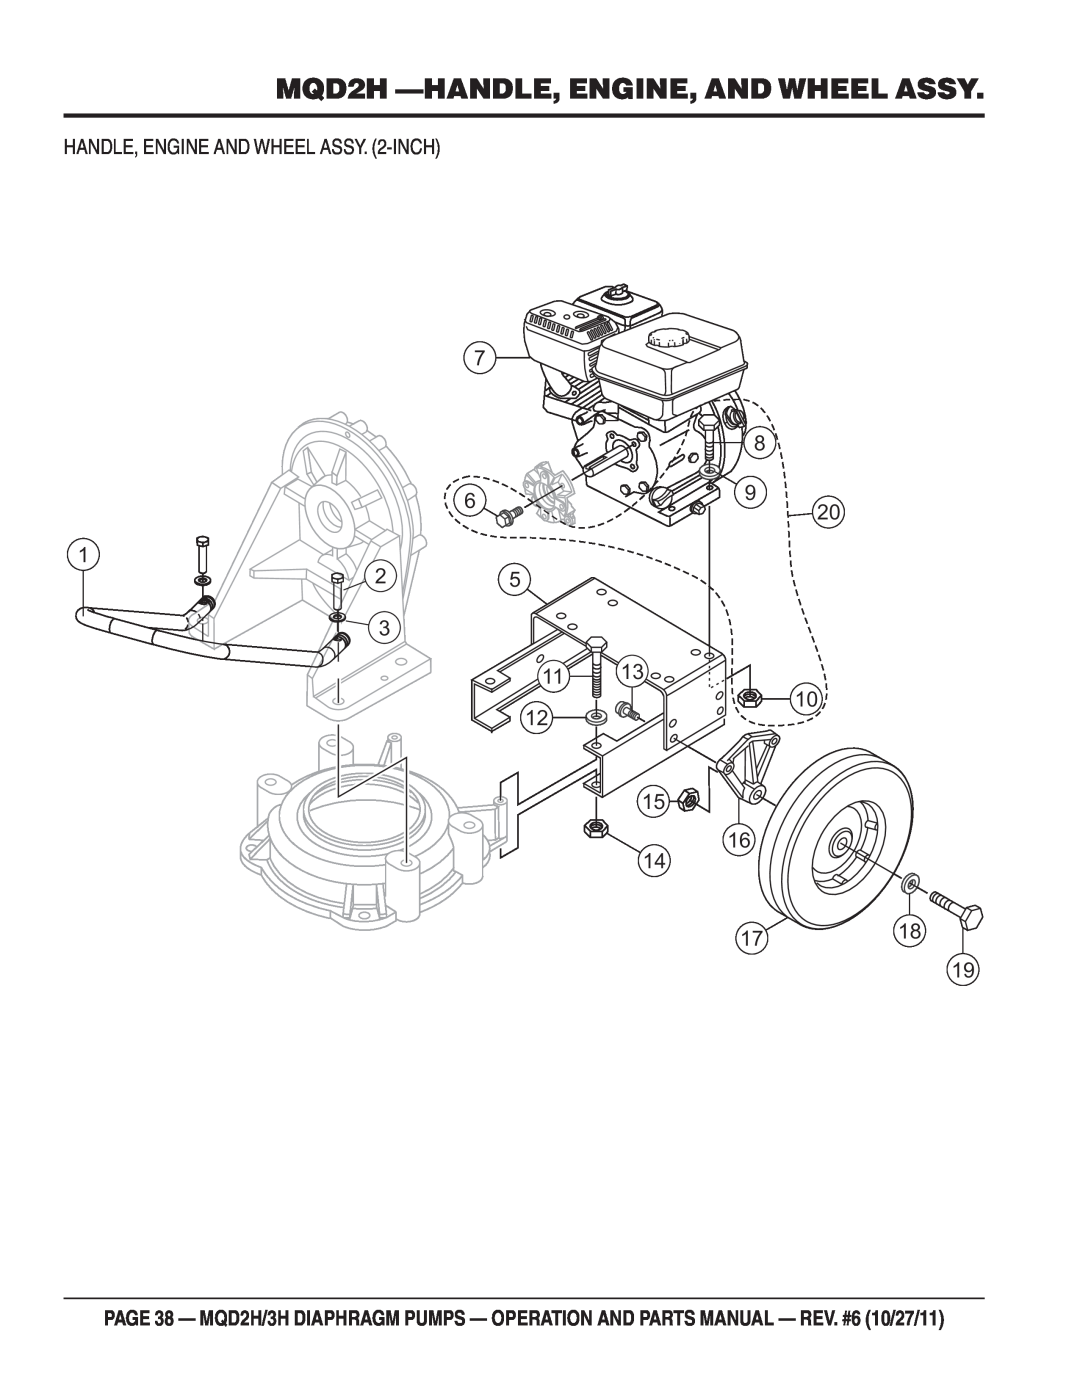 Multiquip manual HANDLE, ENGINE AND WHEEL ASSY. 2-INCH, MQD2H -HANDLE,ENGINE, AND WHEEL ASSY 